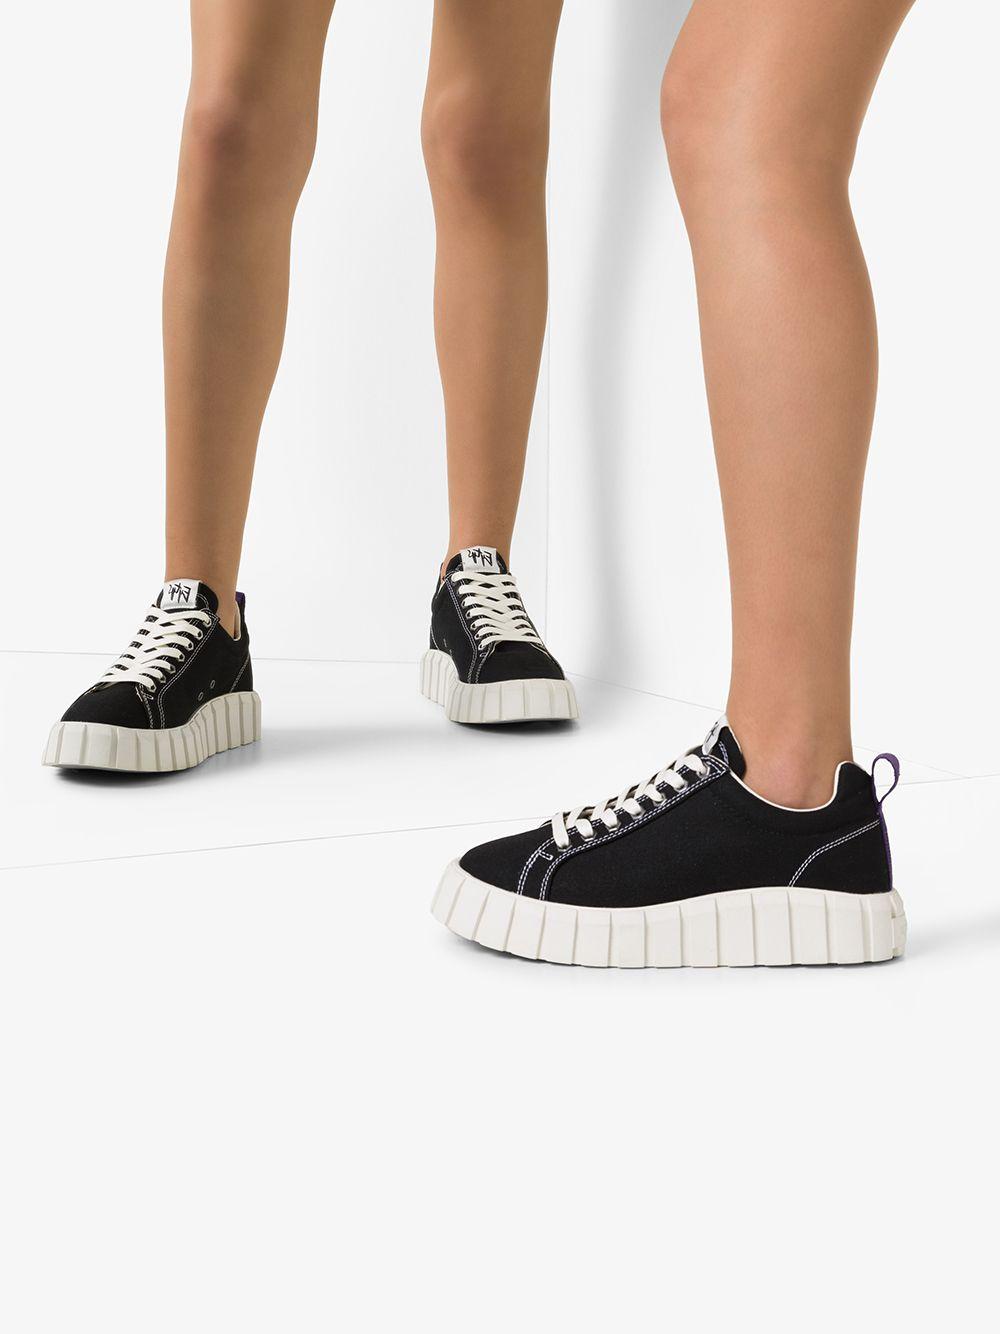 Eytys Canvas Odessa Low Top Sneakers in Black - Lyst